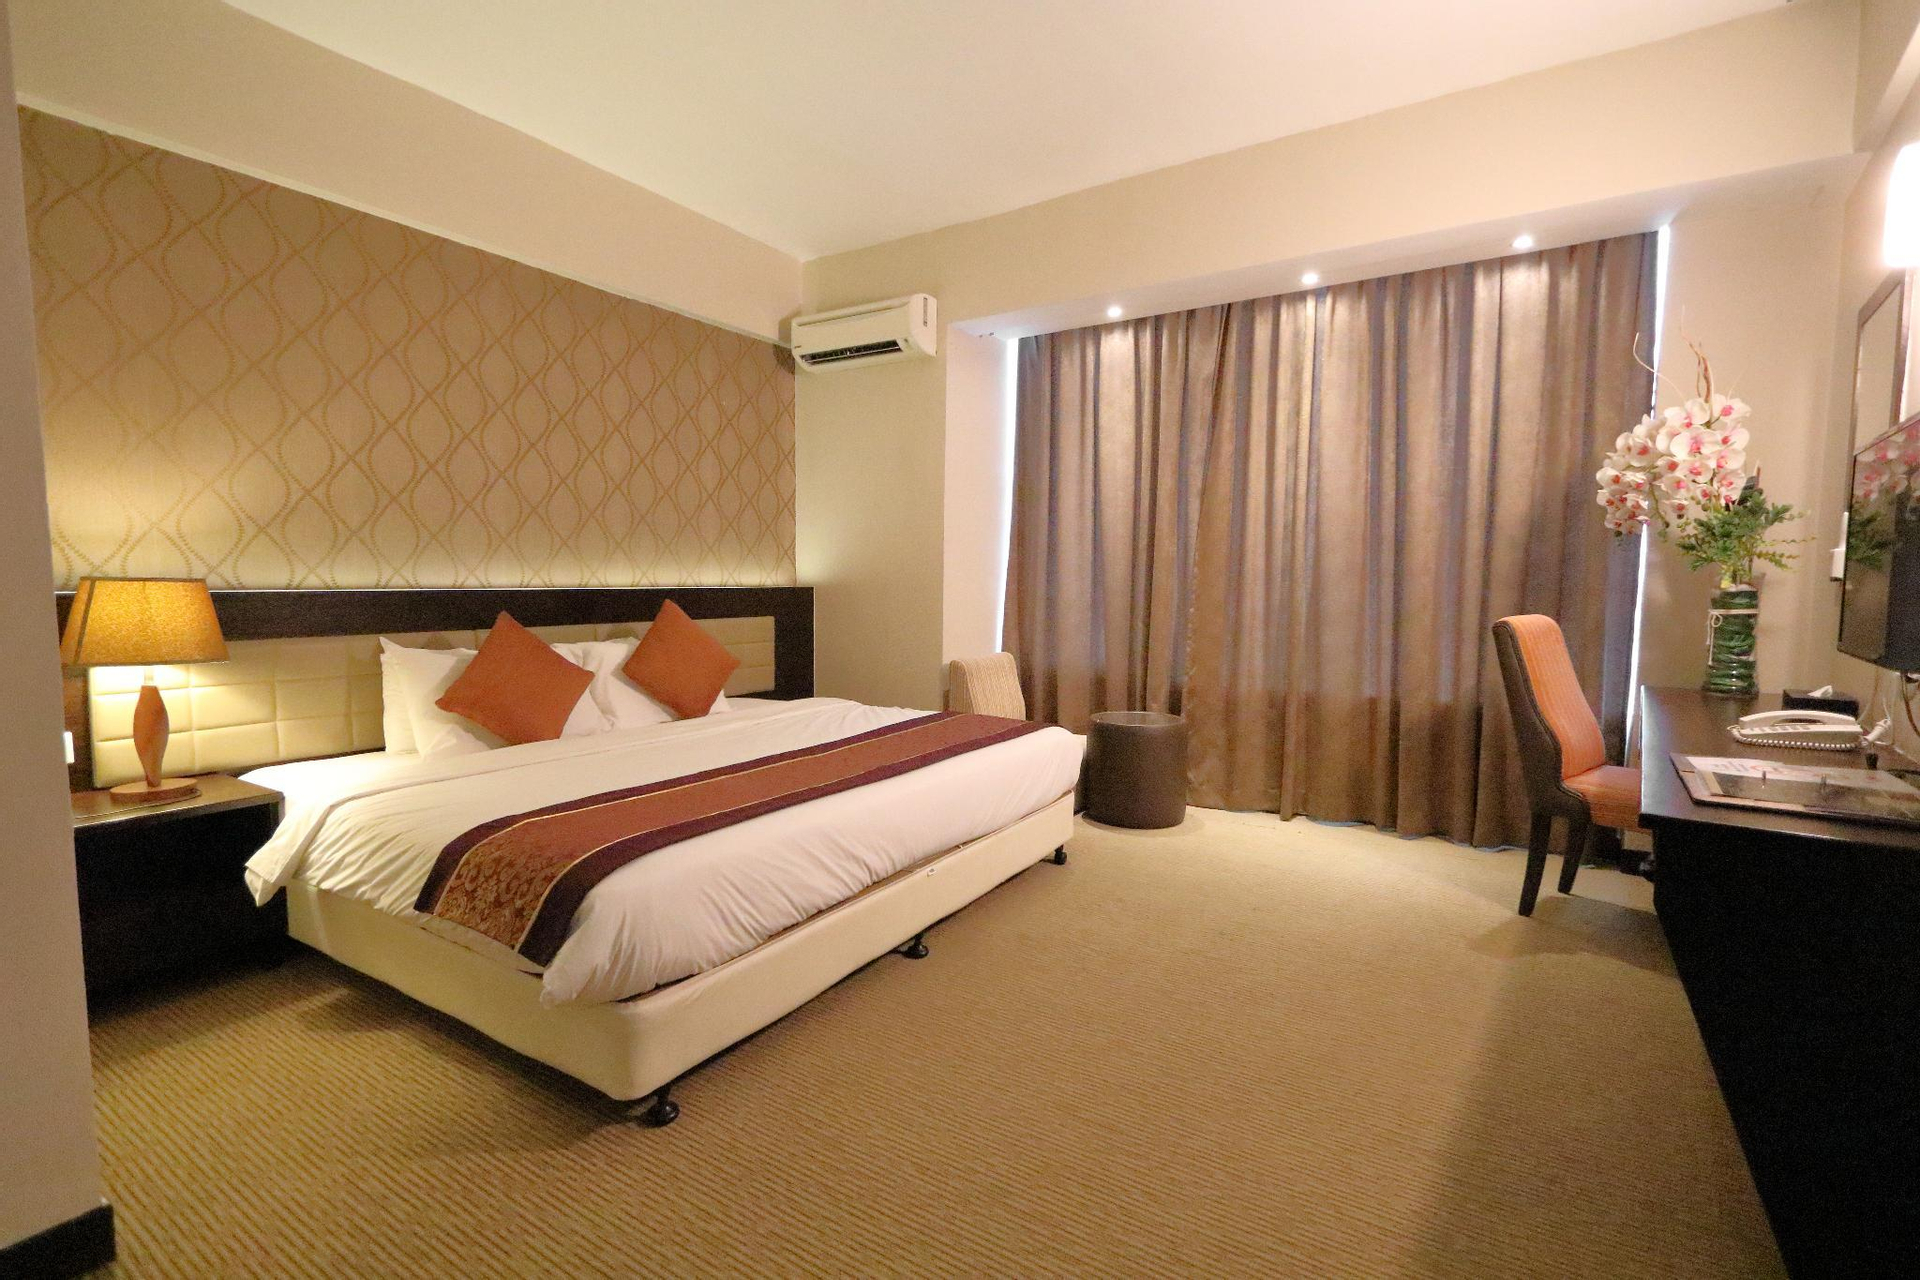 Bedroom, The Guest Hotel & Spa, Port Dickson